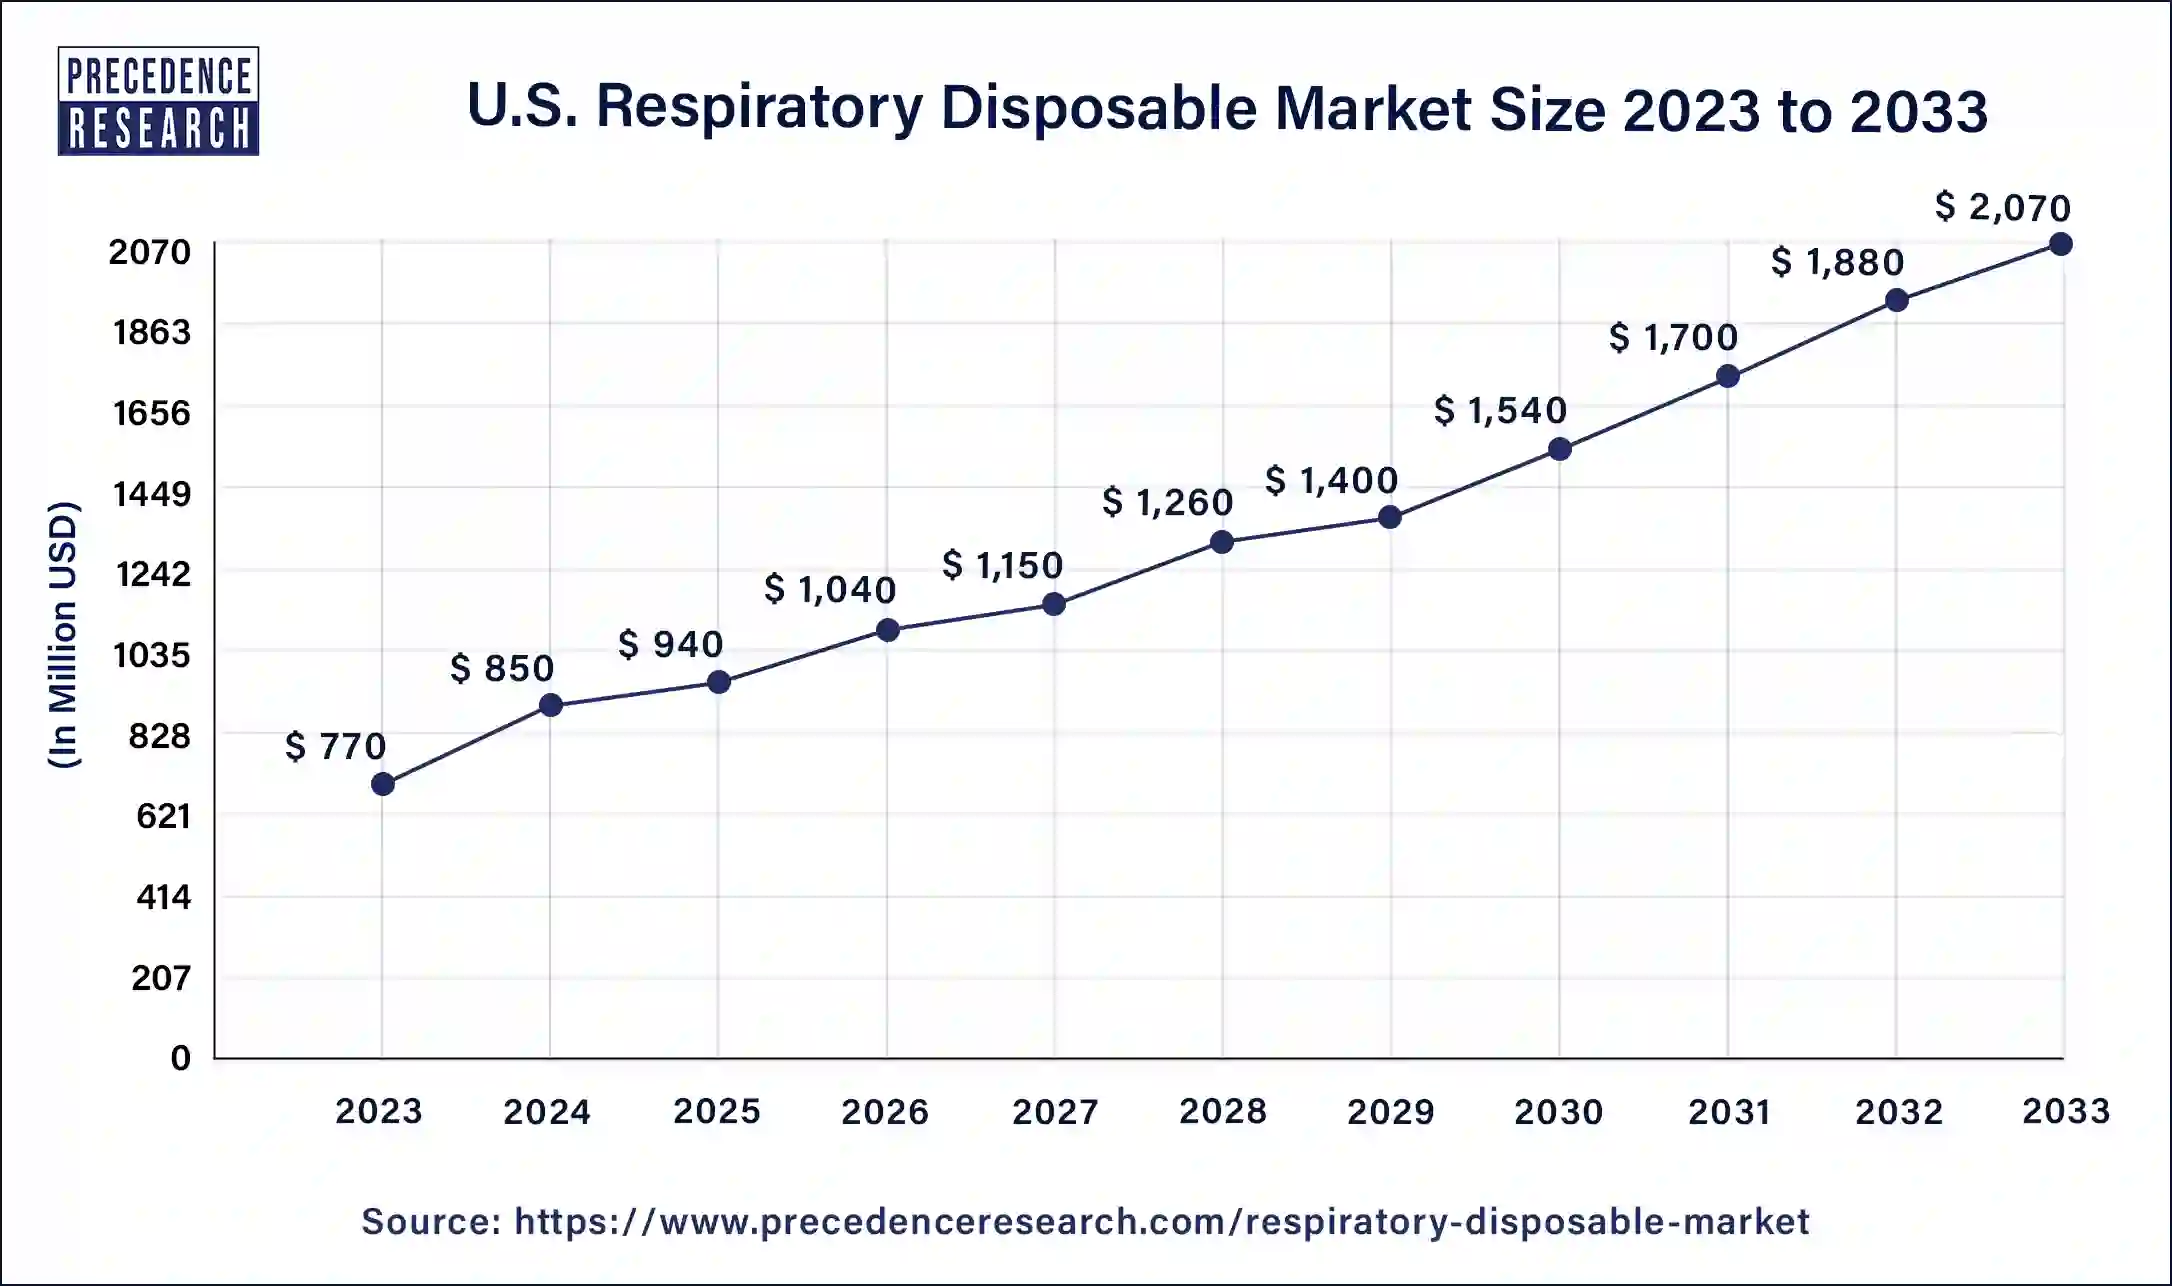 U.S. Respiratory Disposable Market Size 2024 to 2033